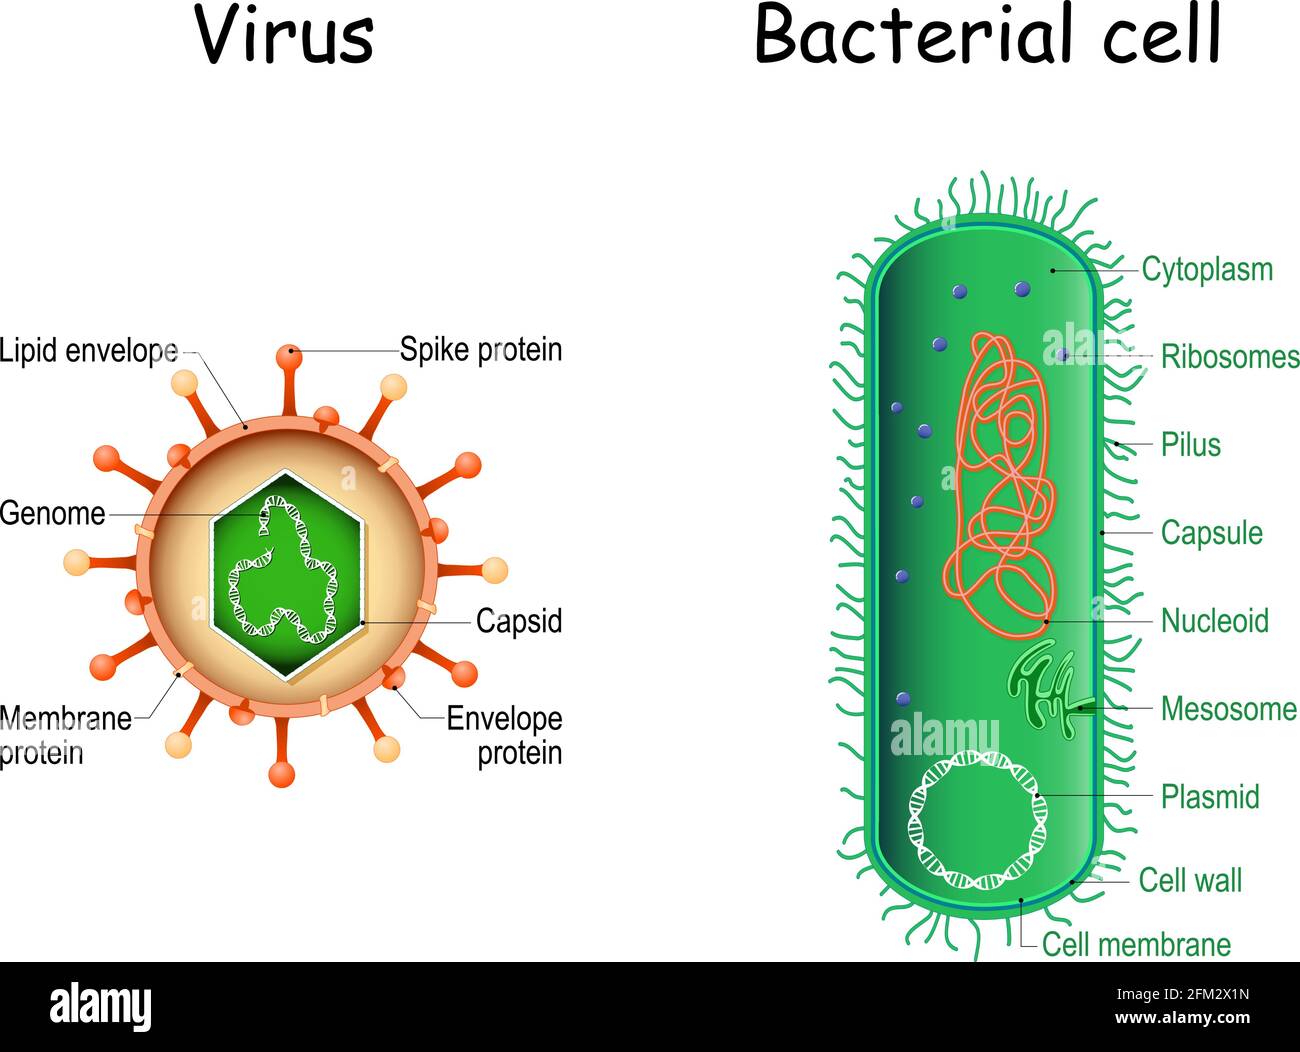 Virus and bacteria. Close-up. comparison and difference. Bacterial cell anatomy and virion structure. Vector illustration Stock Vector